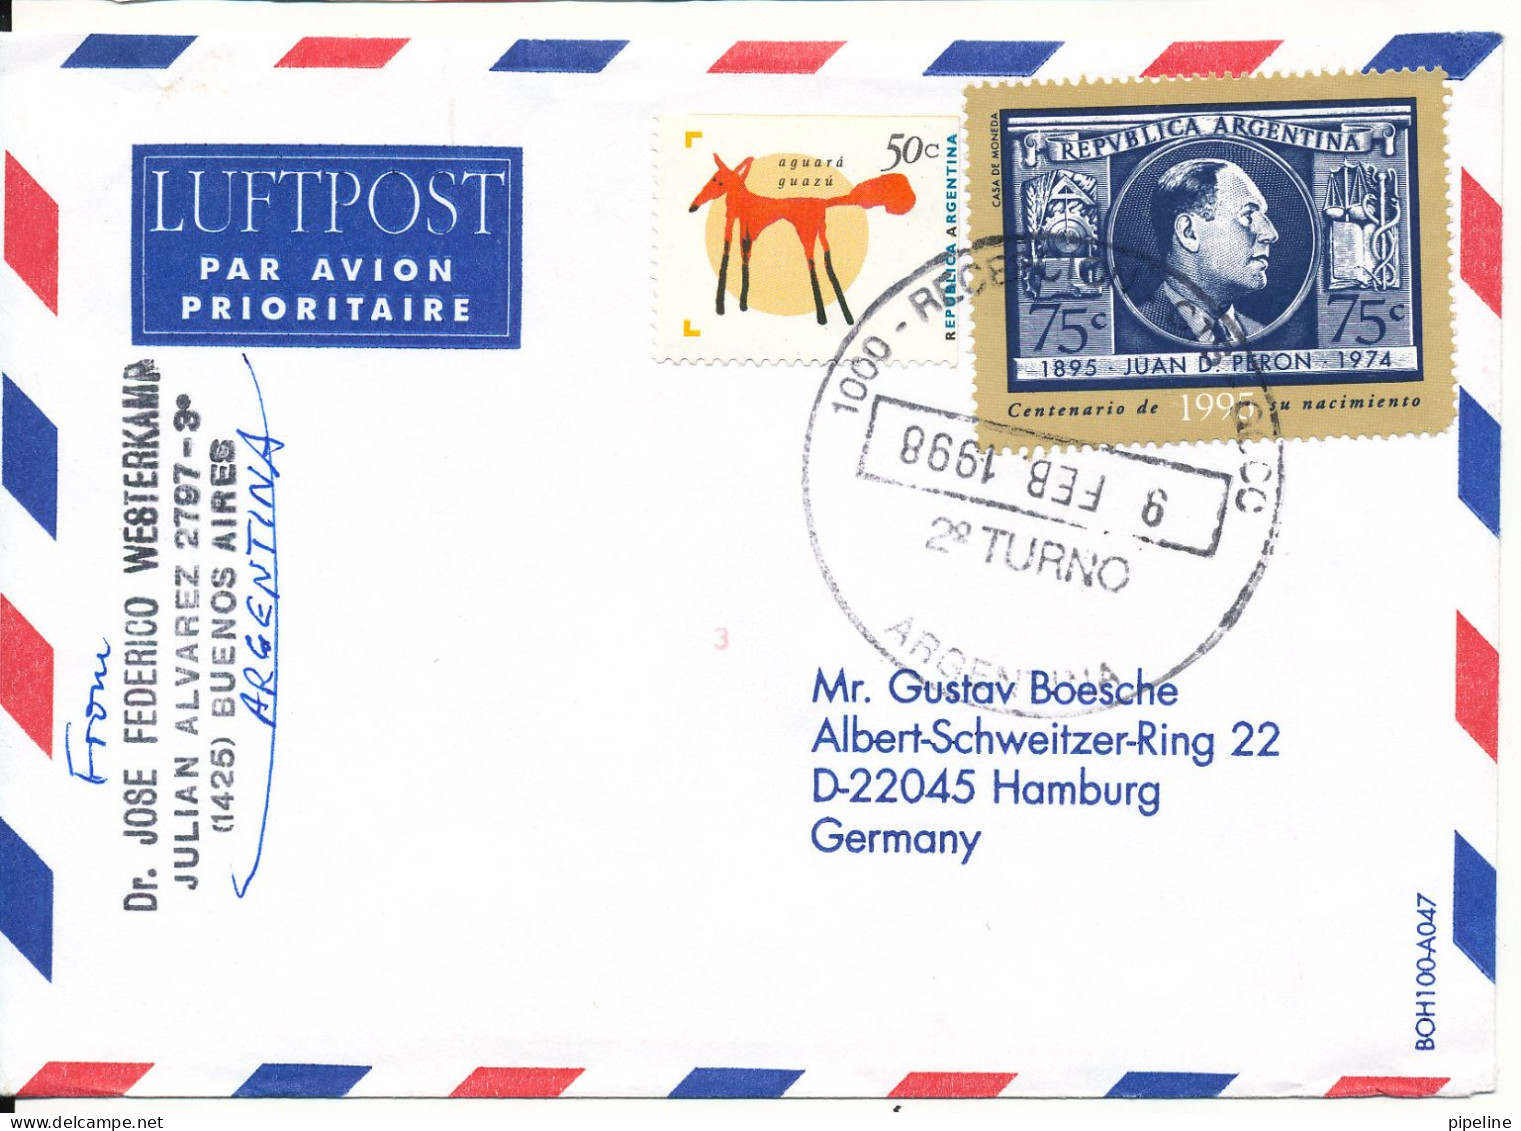 Argentina Air Mail Cover Sent To Germany 9-2-1998 - Luchtpost